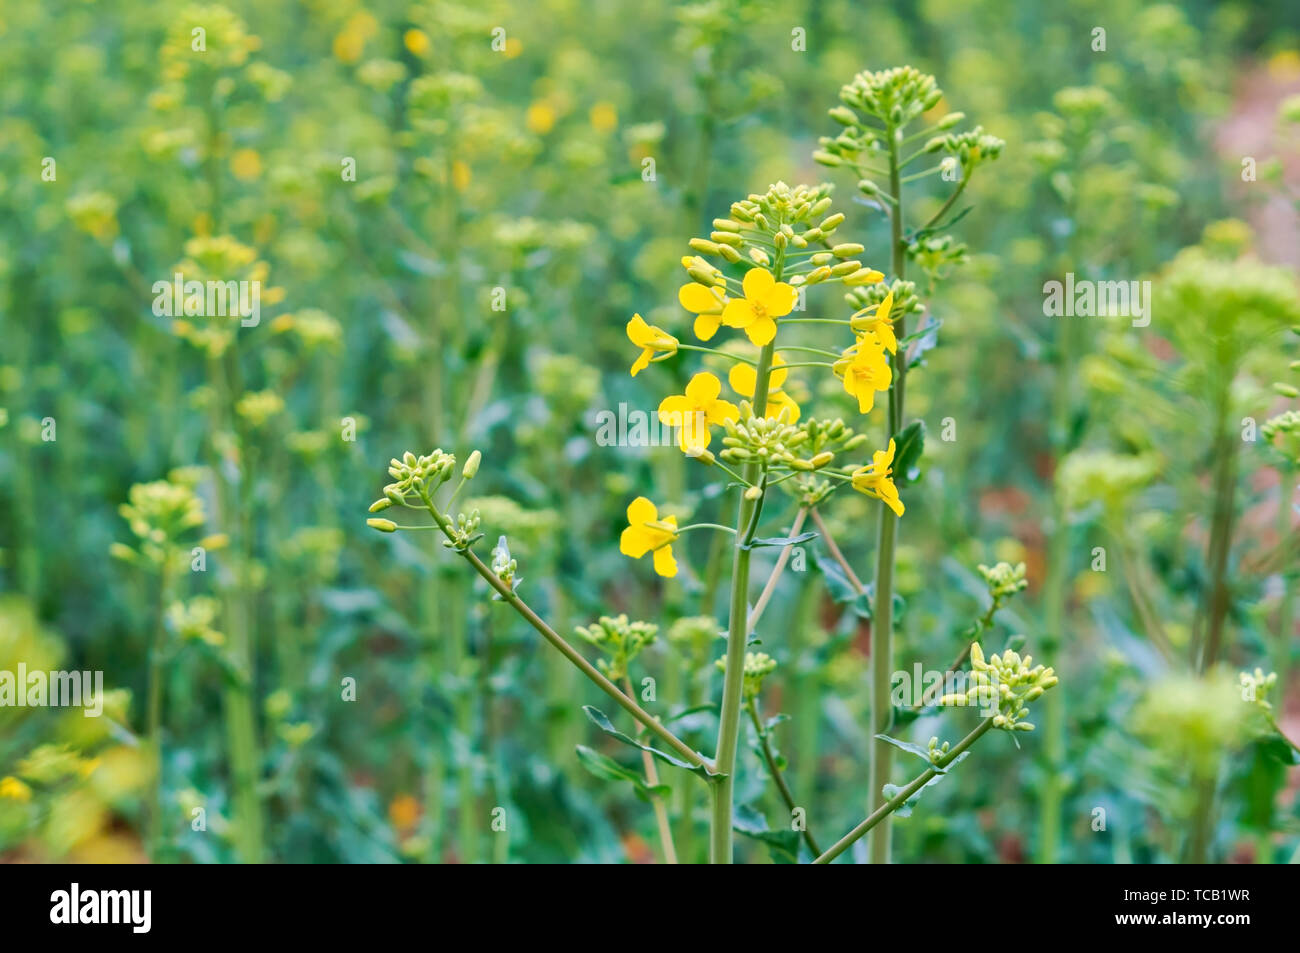 sowing crops of rapeseed, a flowering plant rape Stock Photo